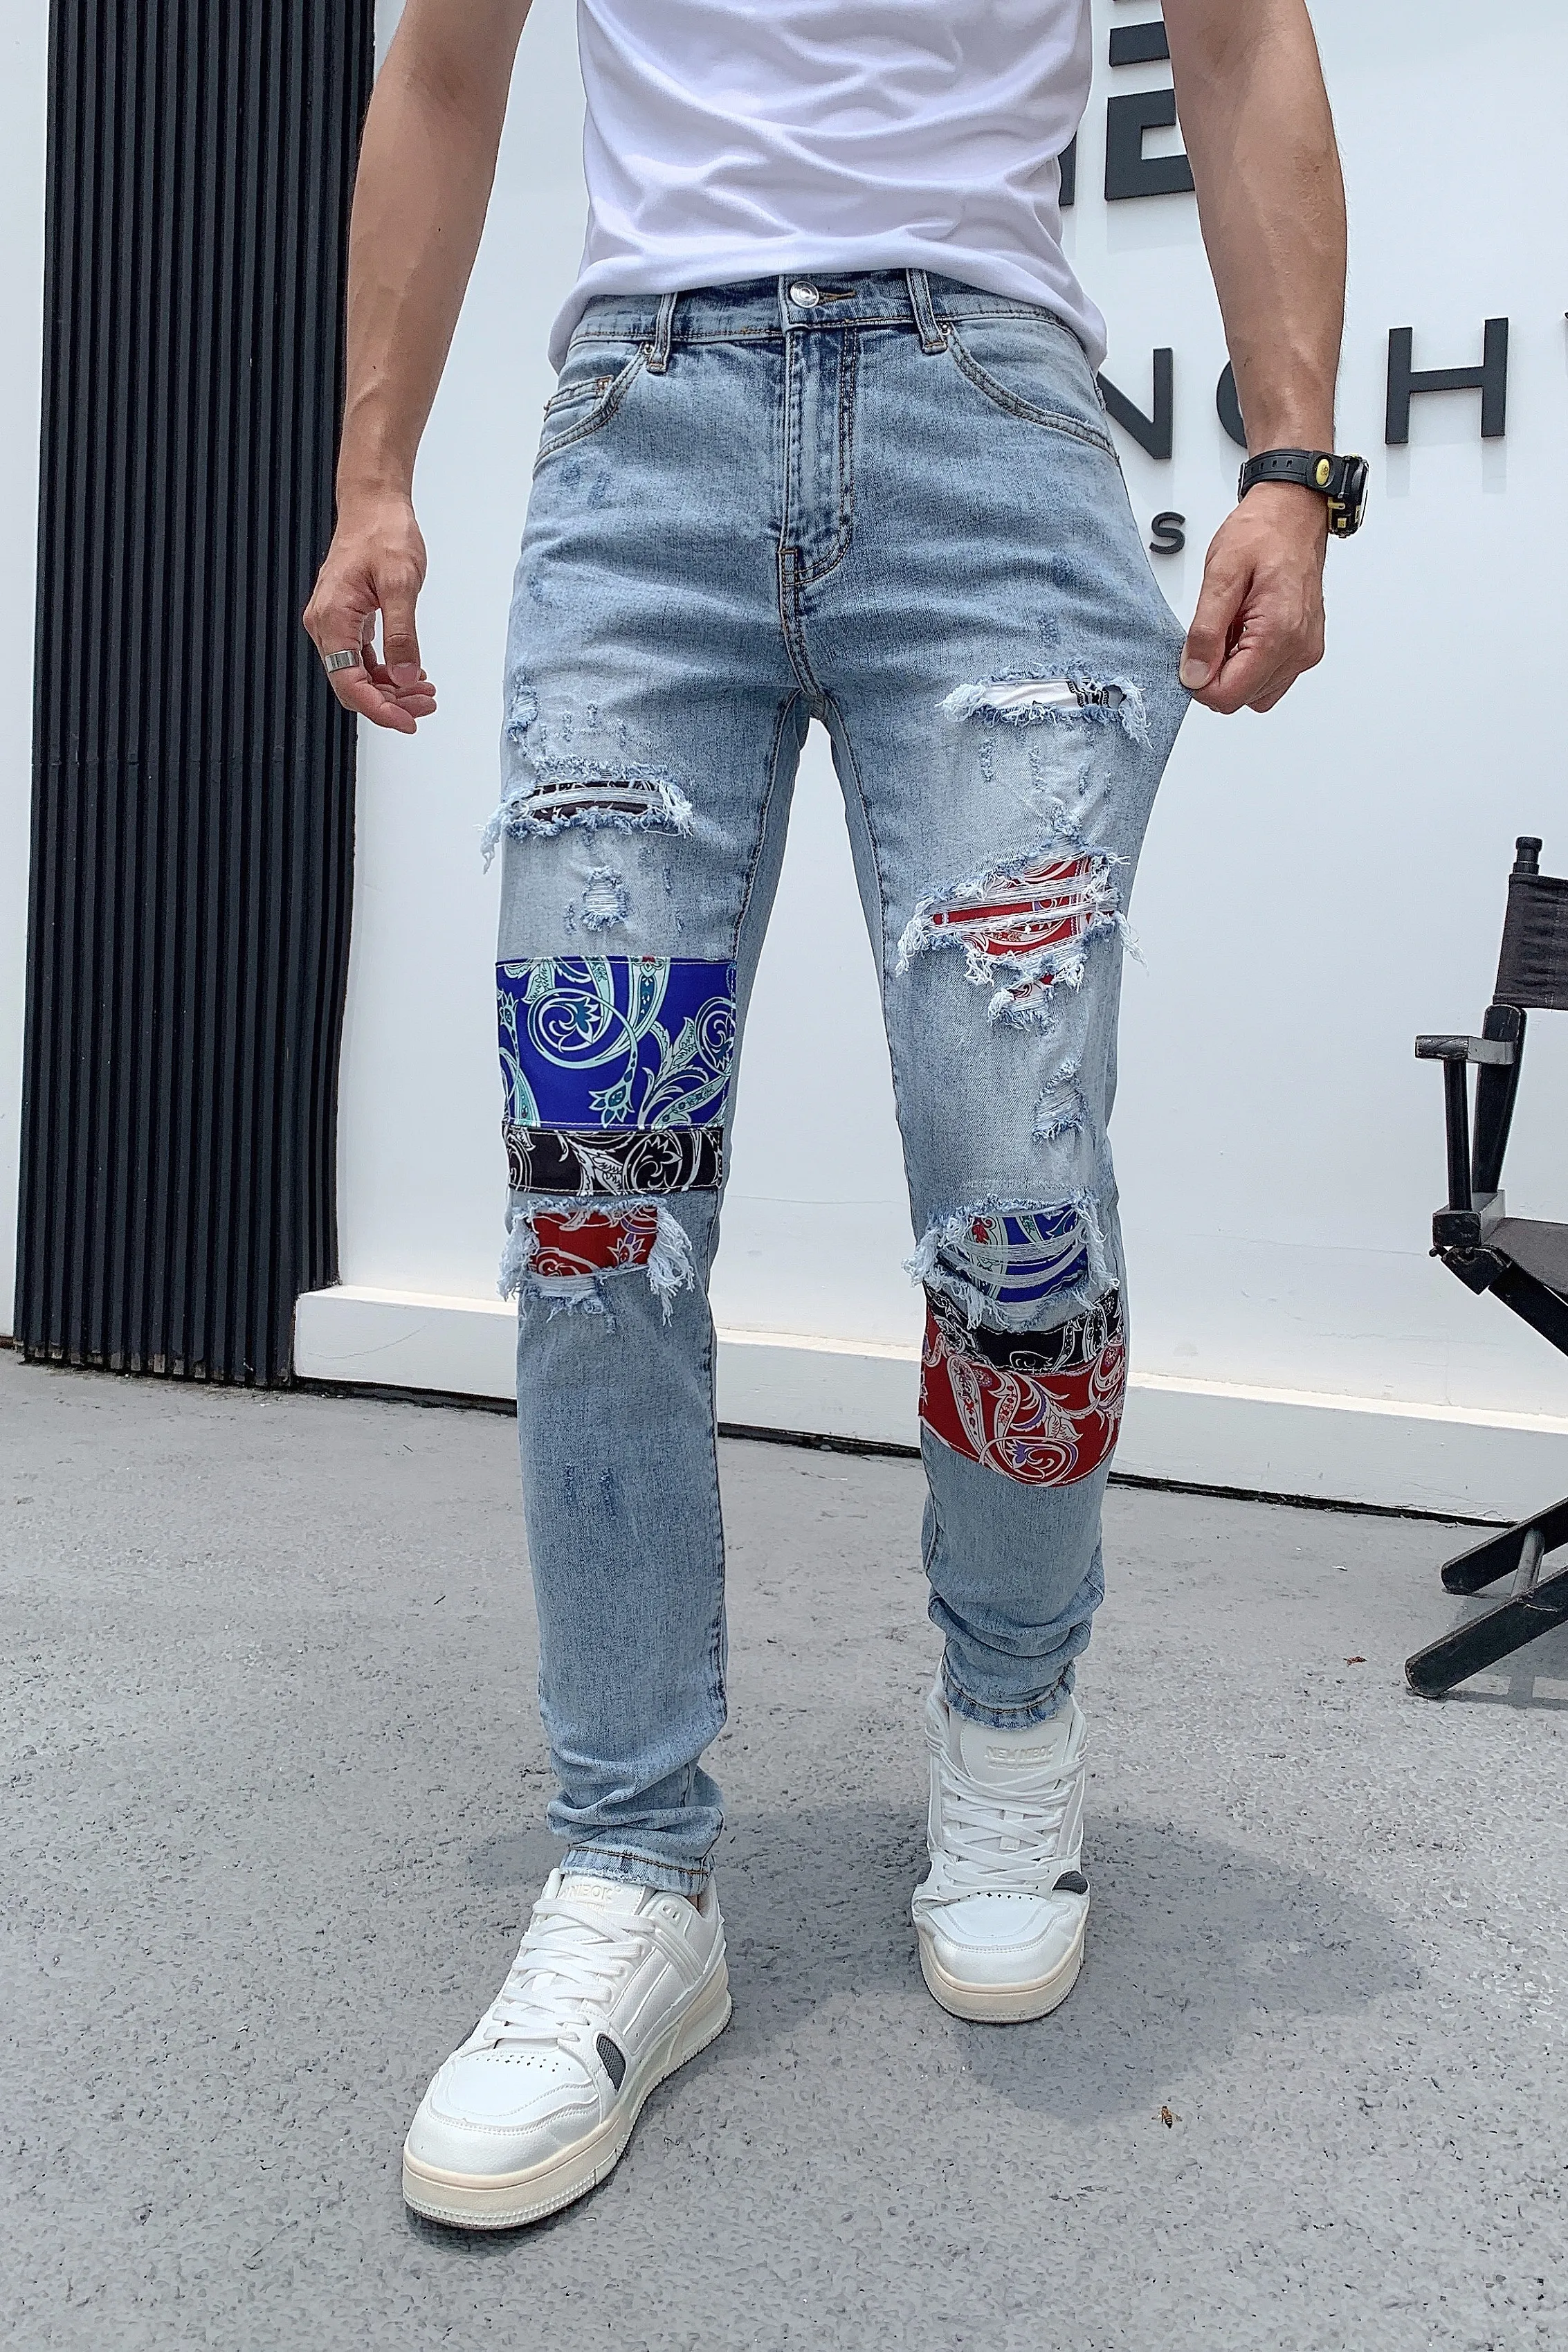 DSQ Jeans Mens Luxury Designer jeans Skinny Ripped Cool Guy Causal Hole Denim Fashion Brand Fit pantalons Hommes Pantalons Lavés